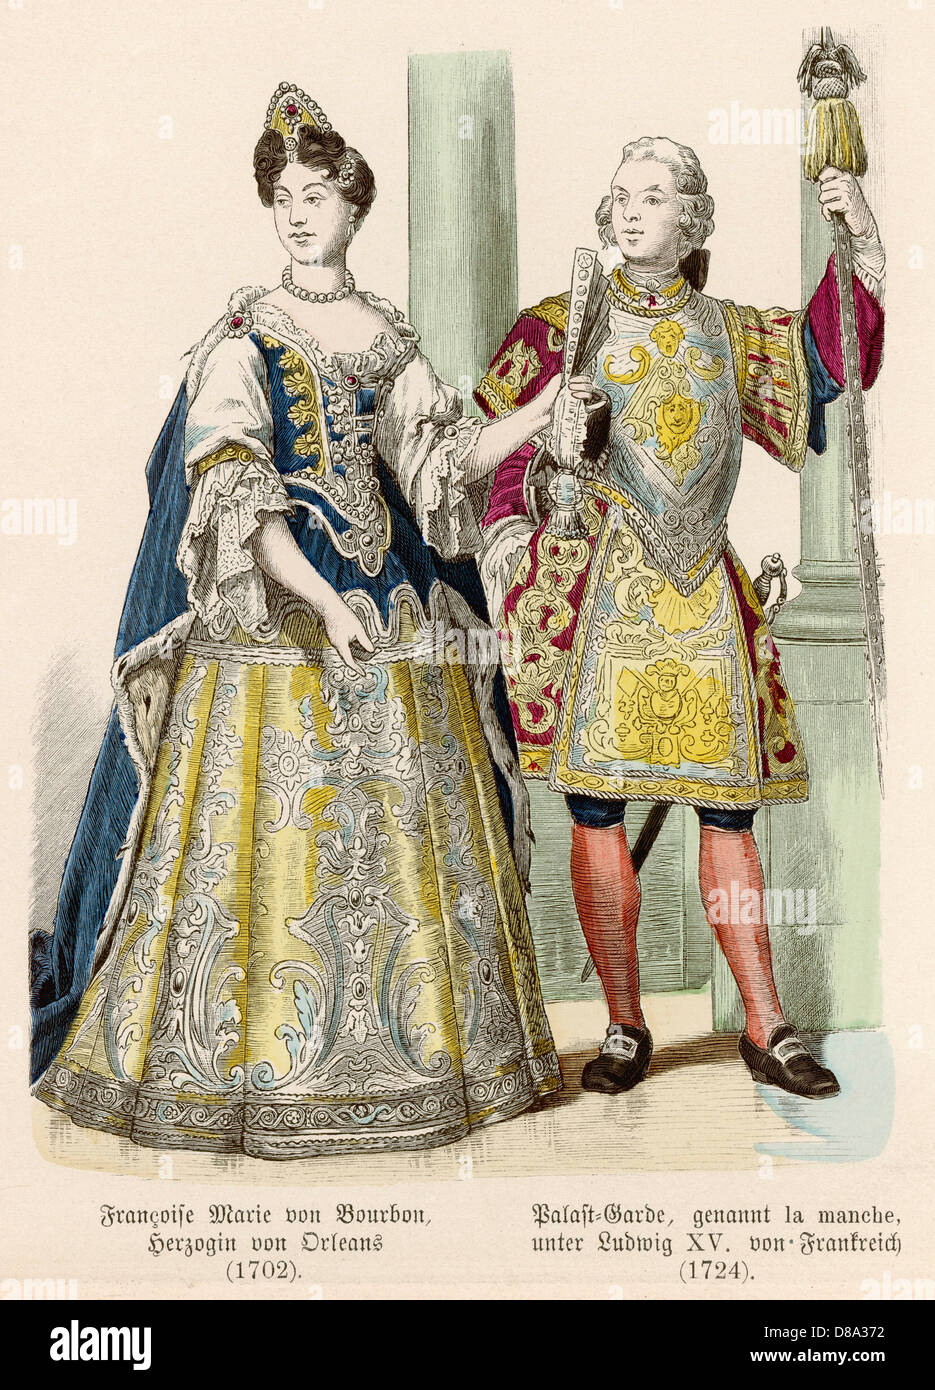 Clothing, fashion in France at the time of the Renaissance around